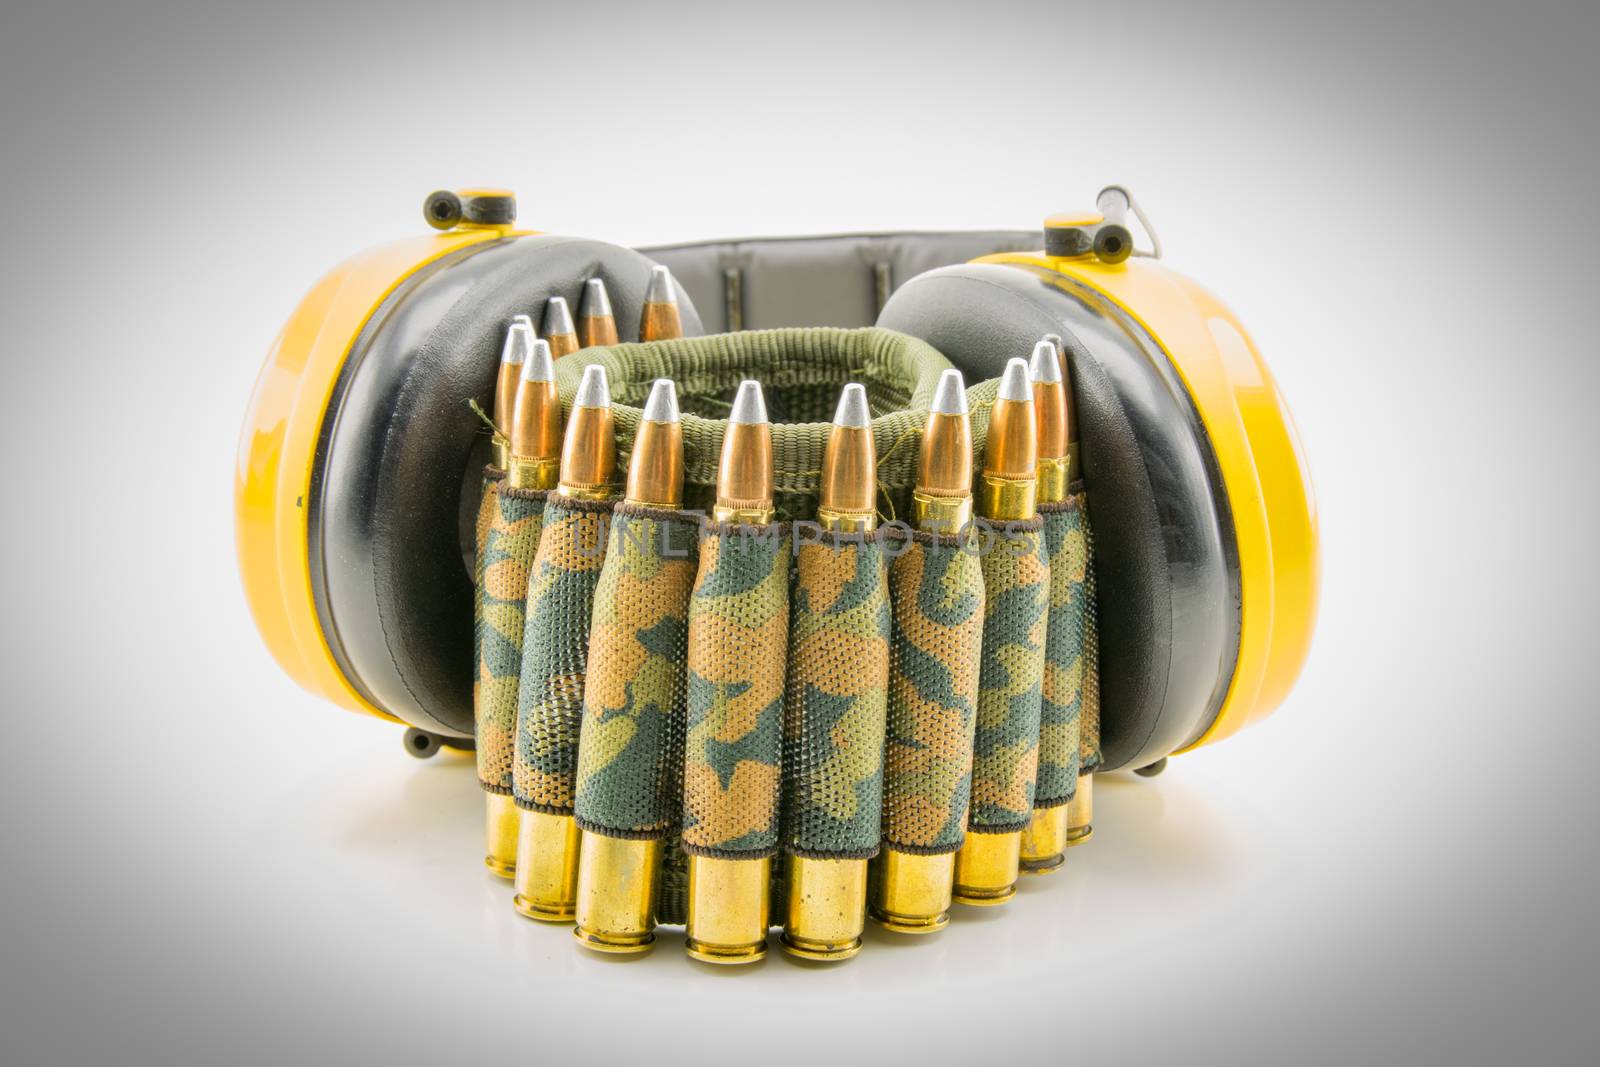 yellow ear protection and camouflage ammunition belt for rifle